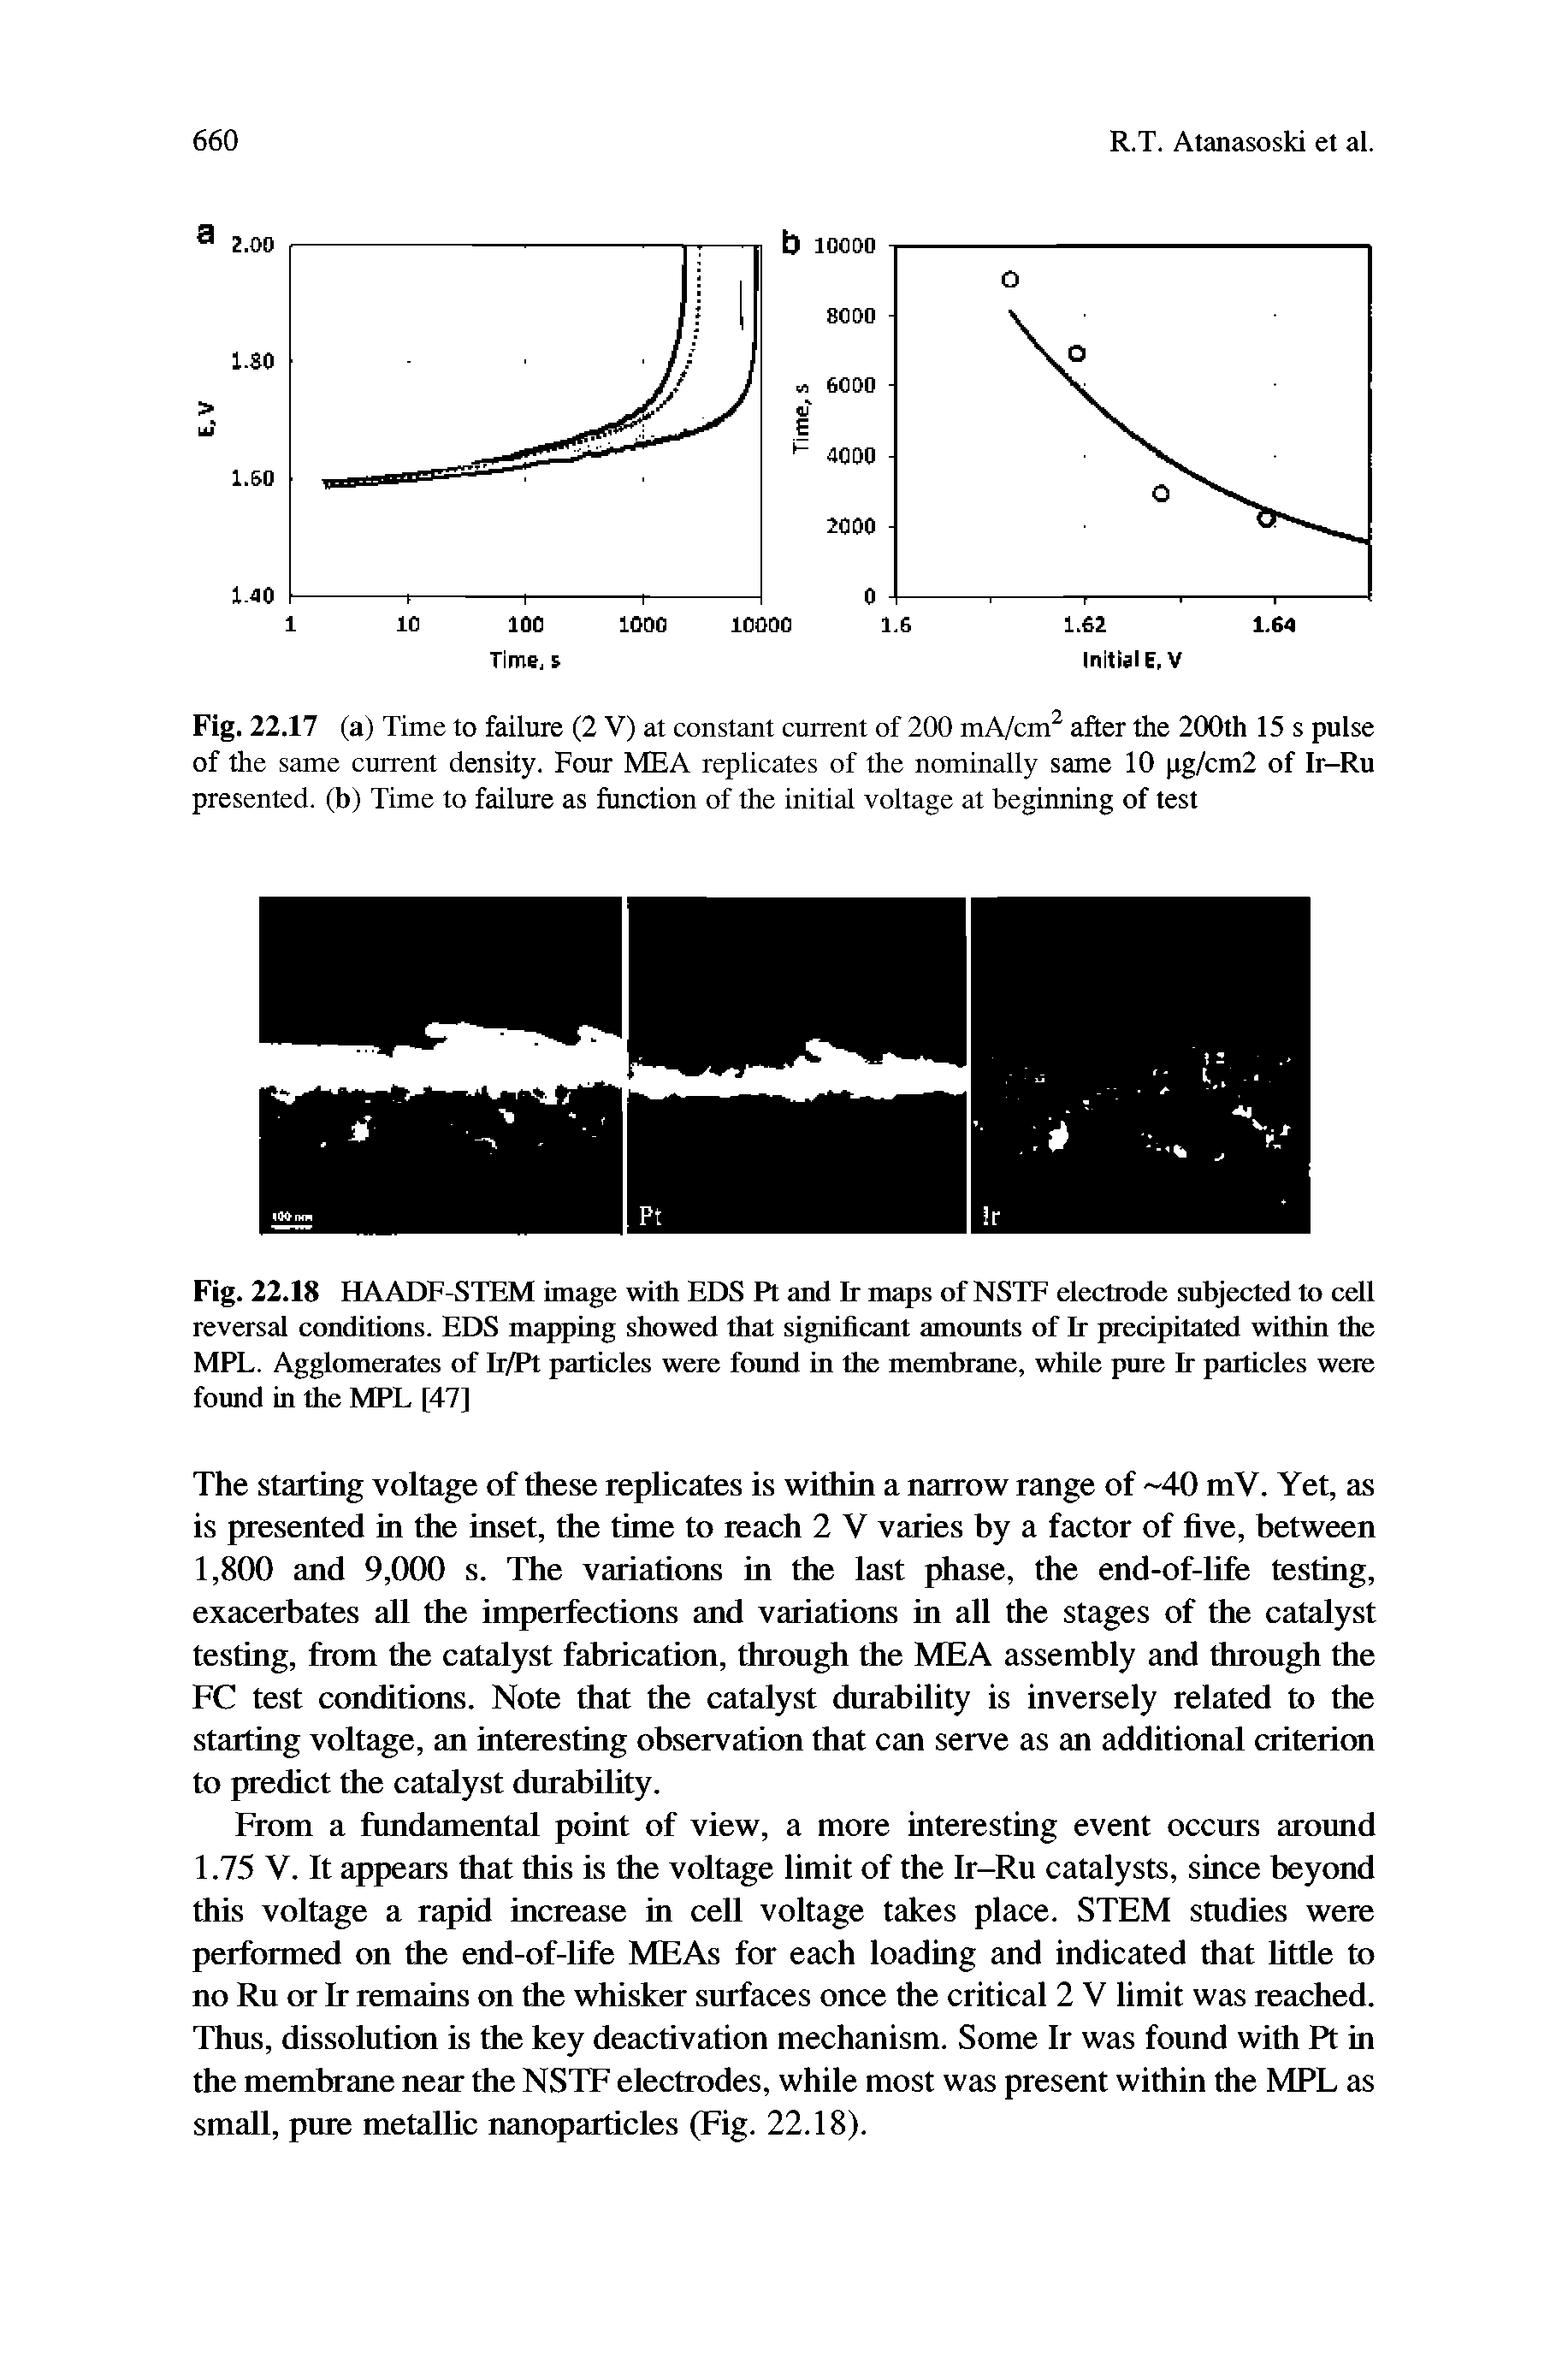 Fig. 22.18 HAADF-STEM image with EDS Pt and Ir maps of NSTF electrode subjected to cell reversal conditions. EDS mapping showed that significant amounts of Ir precipitated within the MPL. Agglomerates of Ir/Pt particles were found in the membrane, while pure Ir particles were found in the MPL [47]...